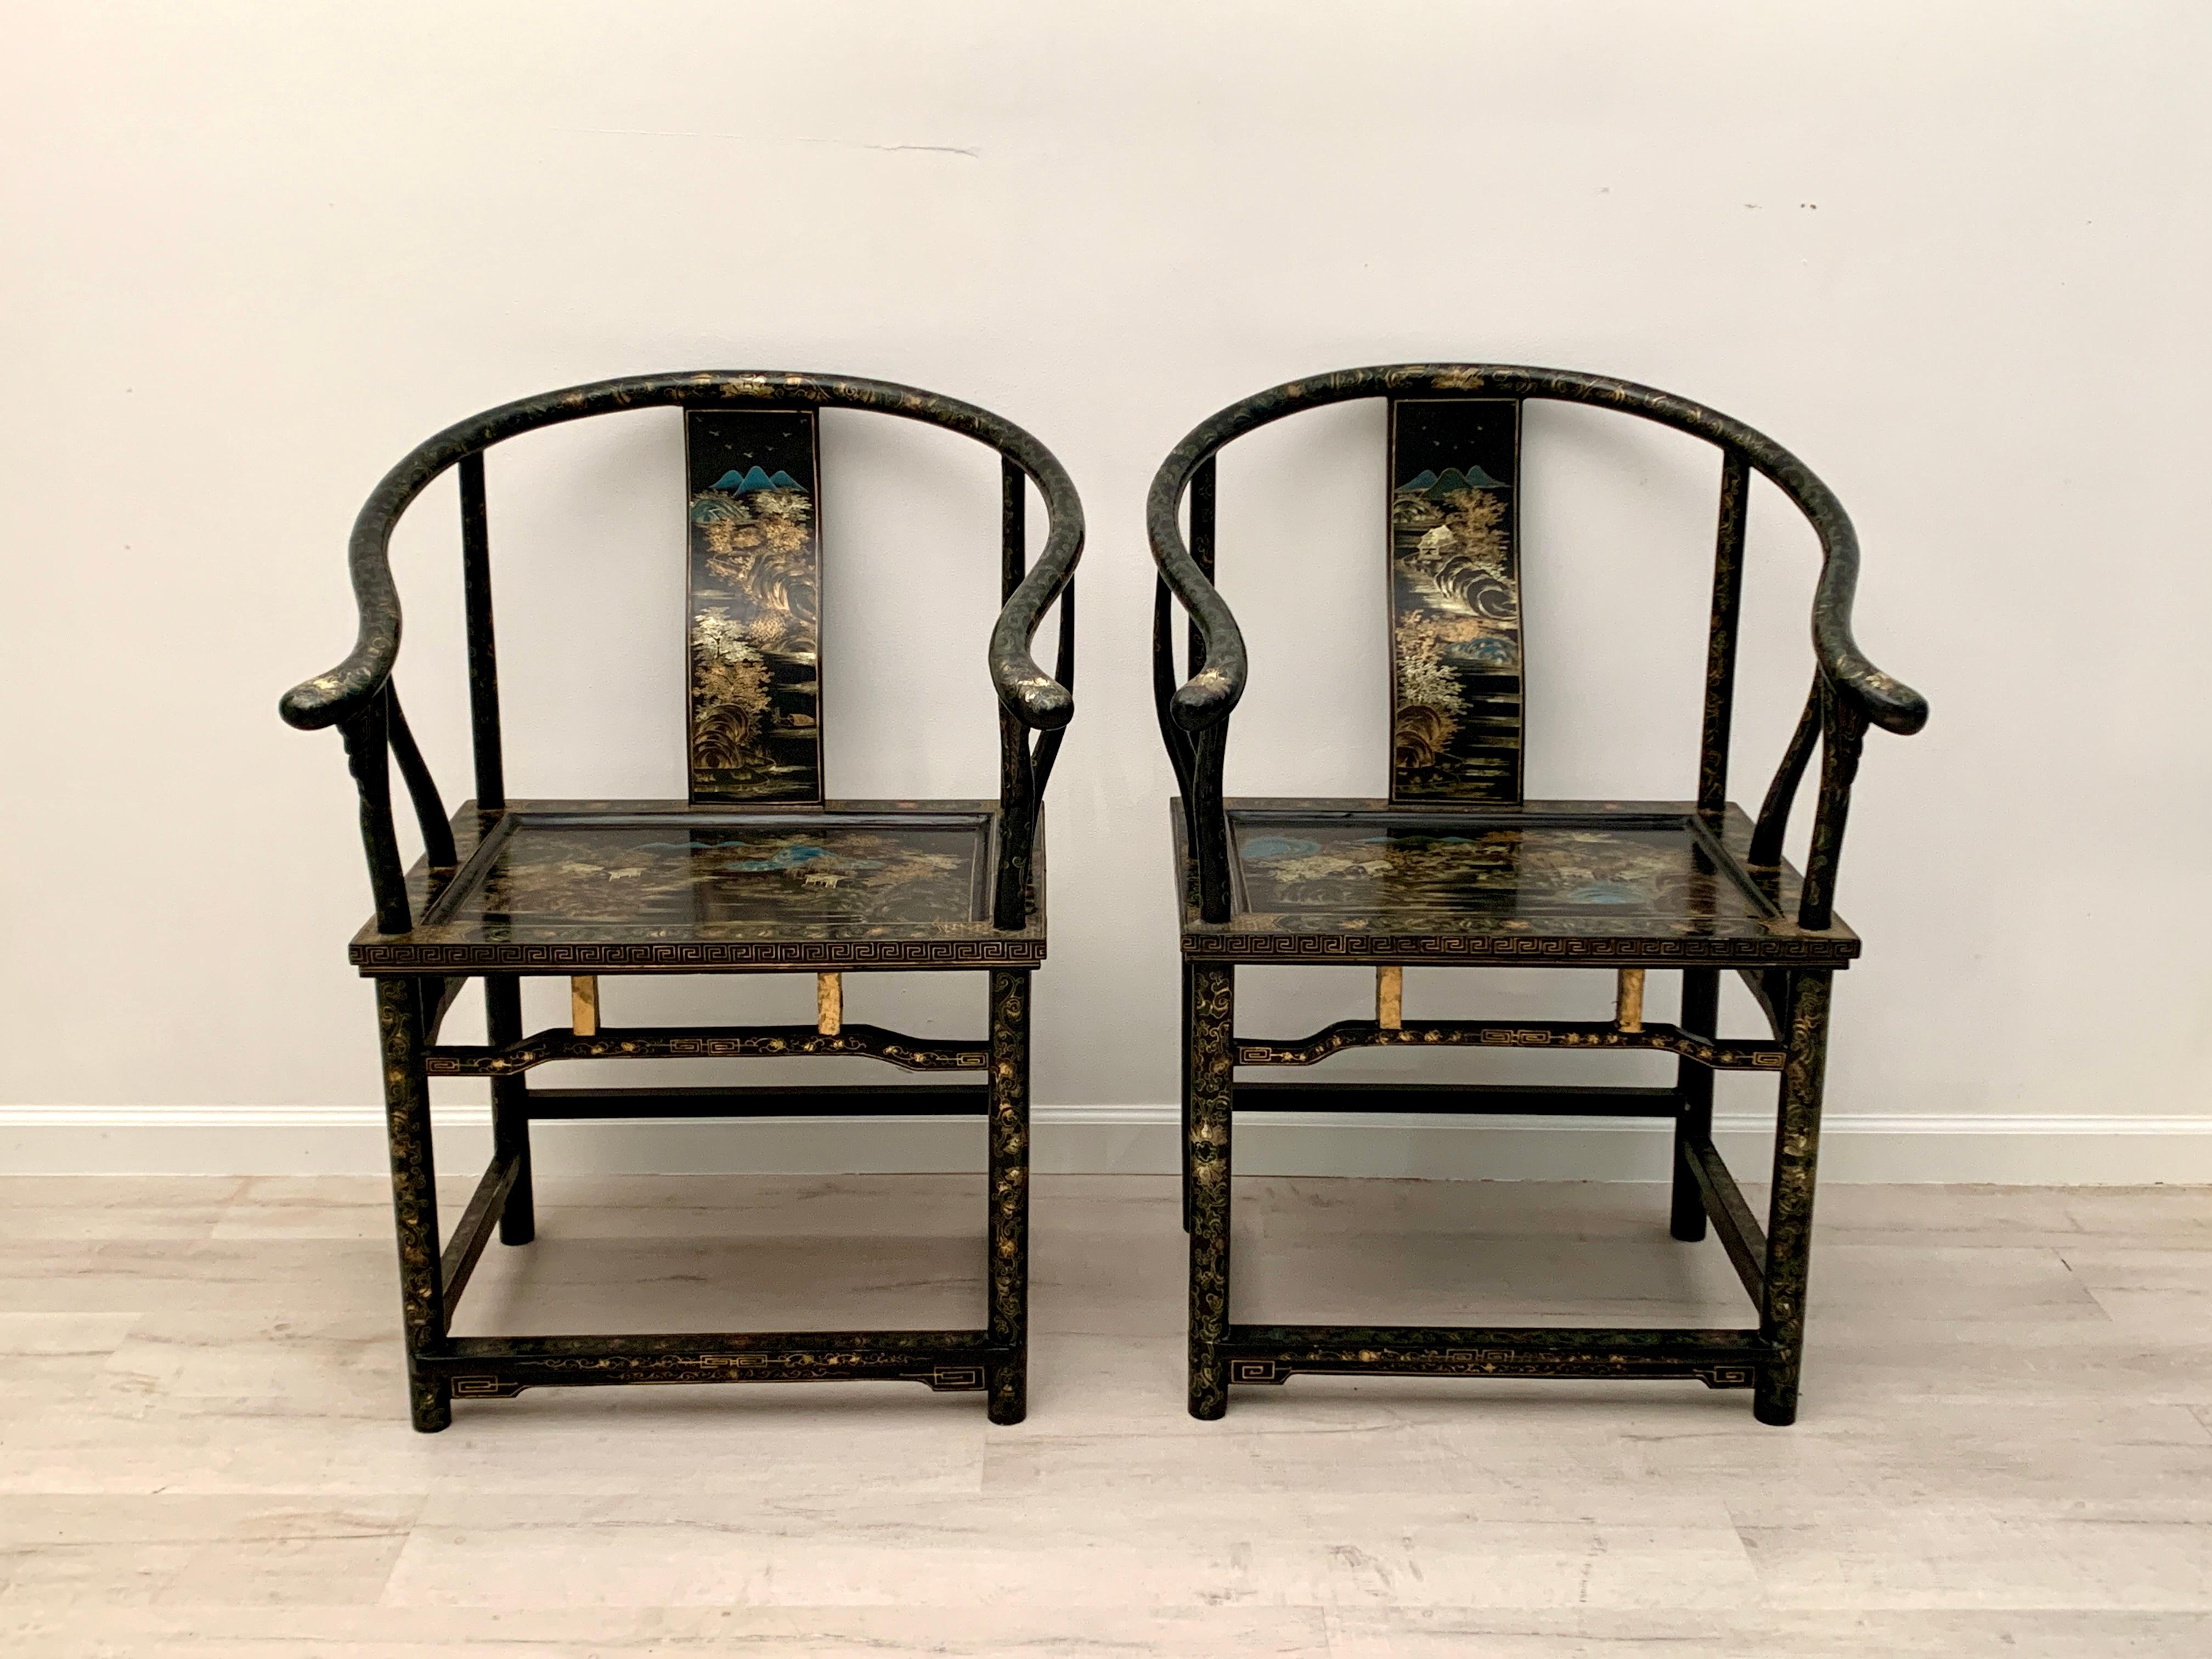 An elegant and exquisite pair of Chinese export black lacquer, gilt and polychrome painted horseshoe back chairs, mid 20th century, China.

The black lacquer chairs of horseshoe back form, with an elegantly curved backrail sloping downwards to